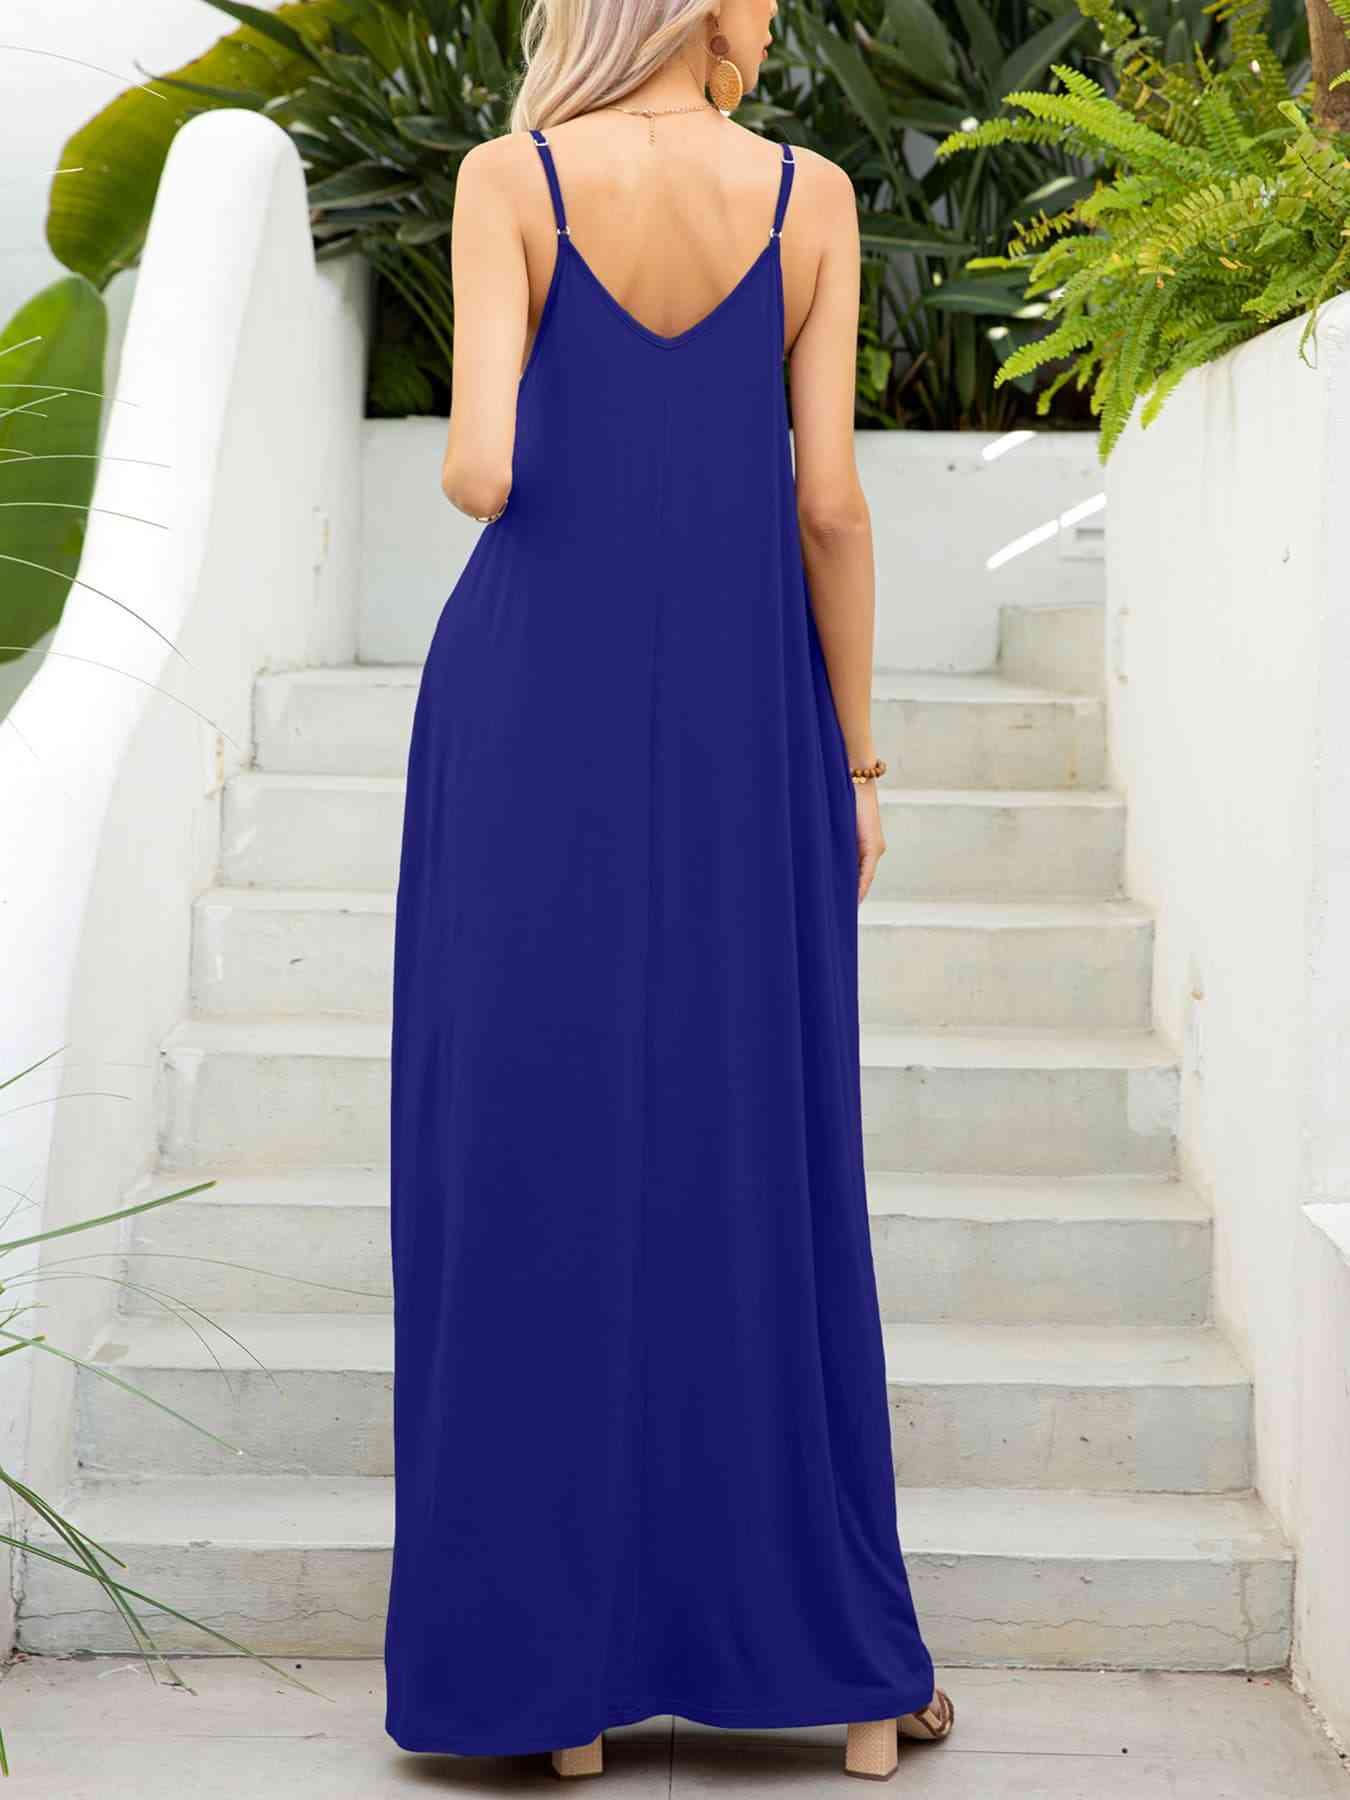 a woman in a blue dress standing on steps